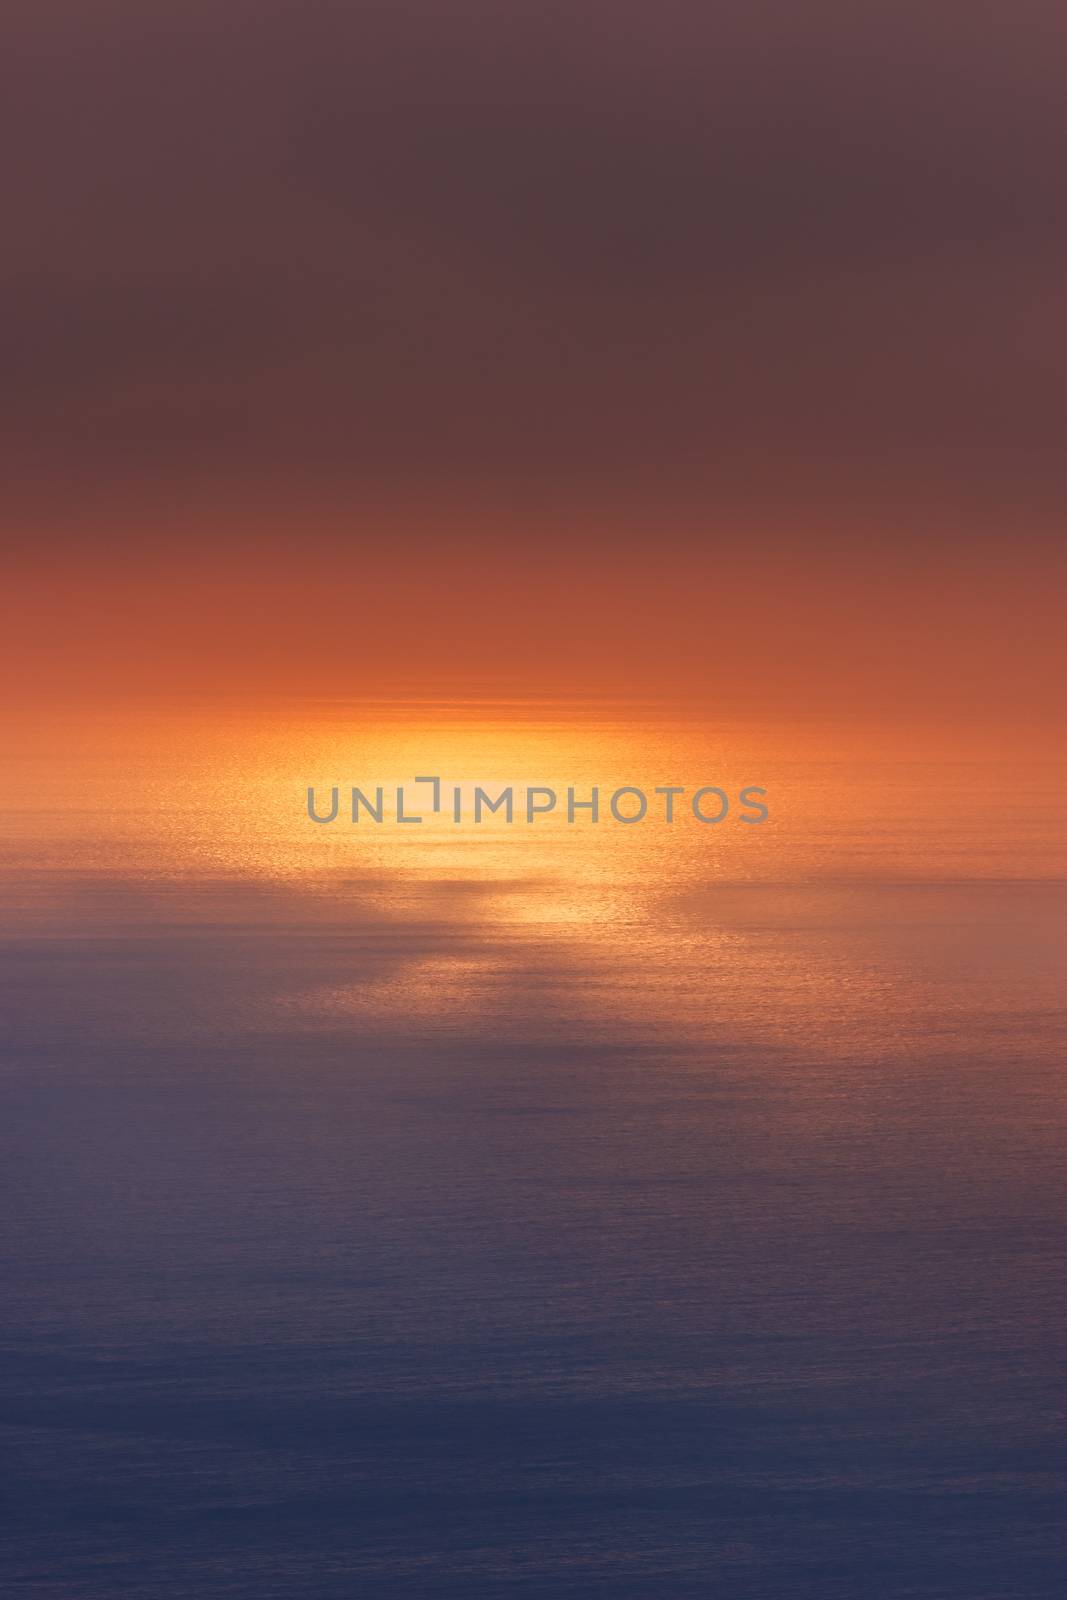 Sunlight reflecting off water. Scenic view of sunset over sea seen from a cruiser. Suitable for background.